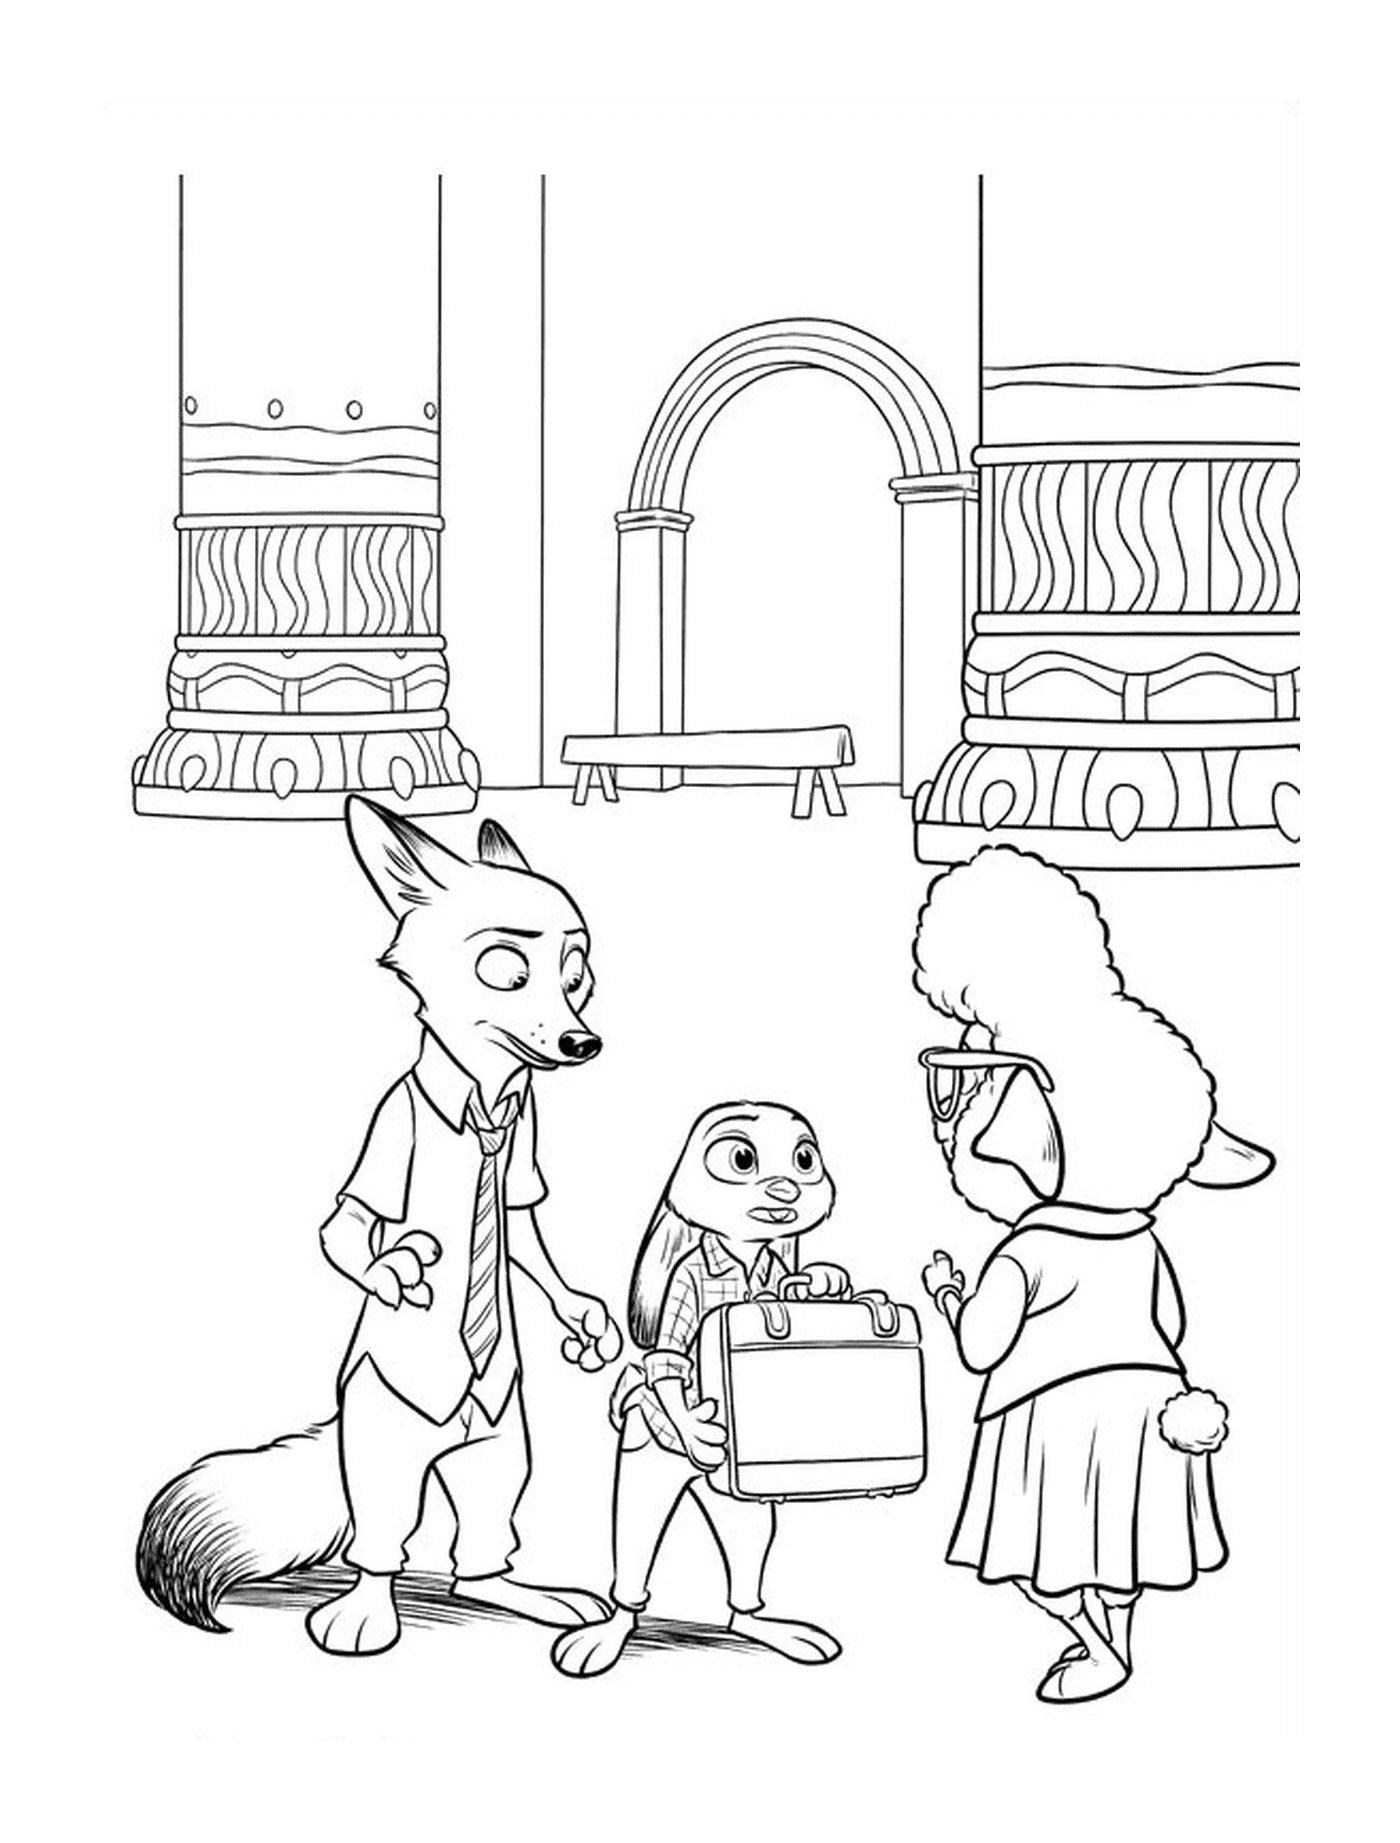  Judy and Nick with Mrs Bellwether in Zootopie 